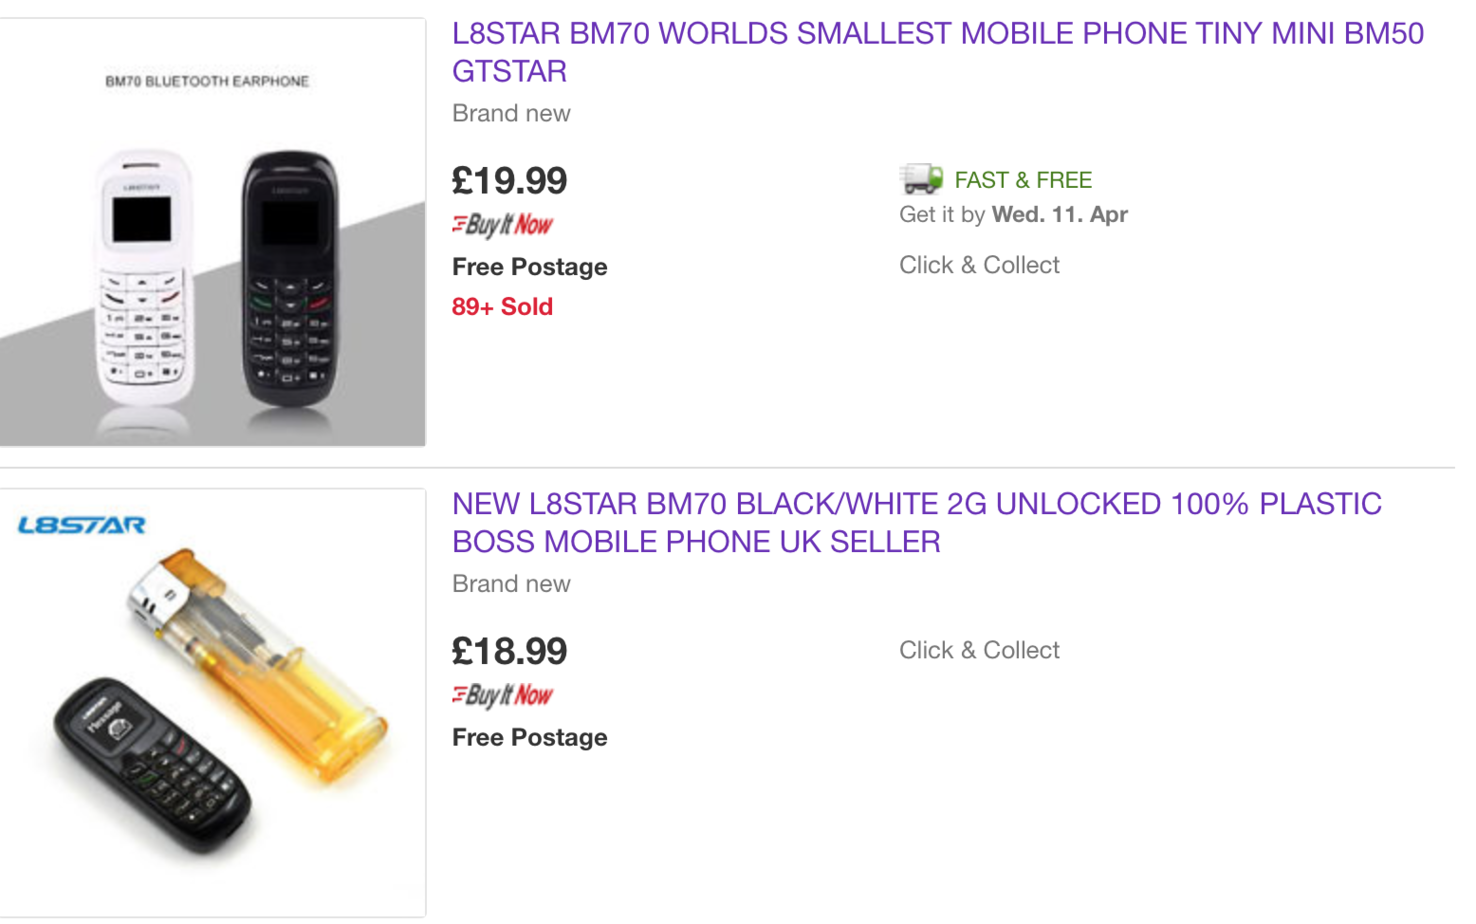 2 listings of tiny phone